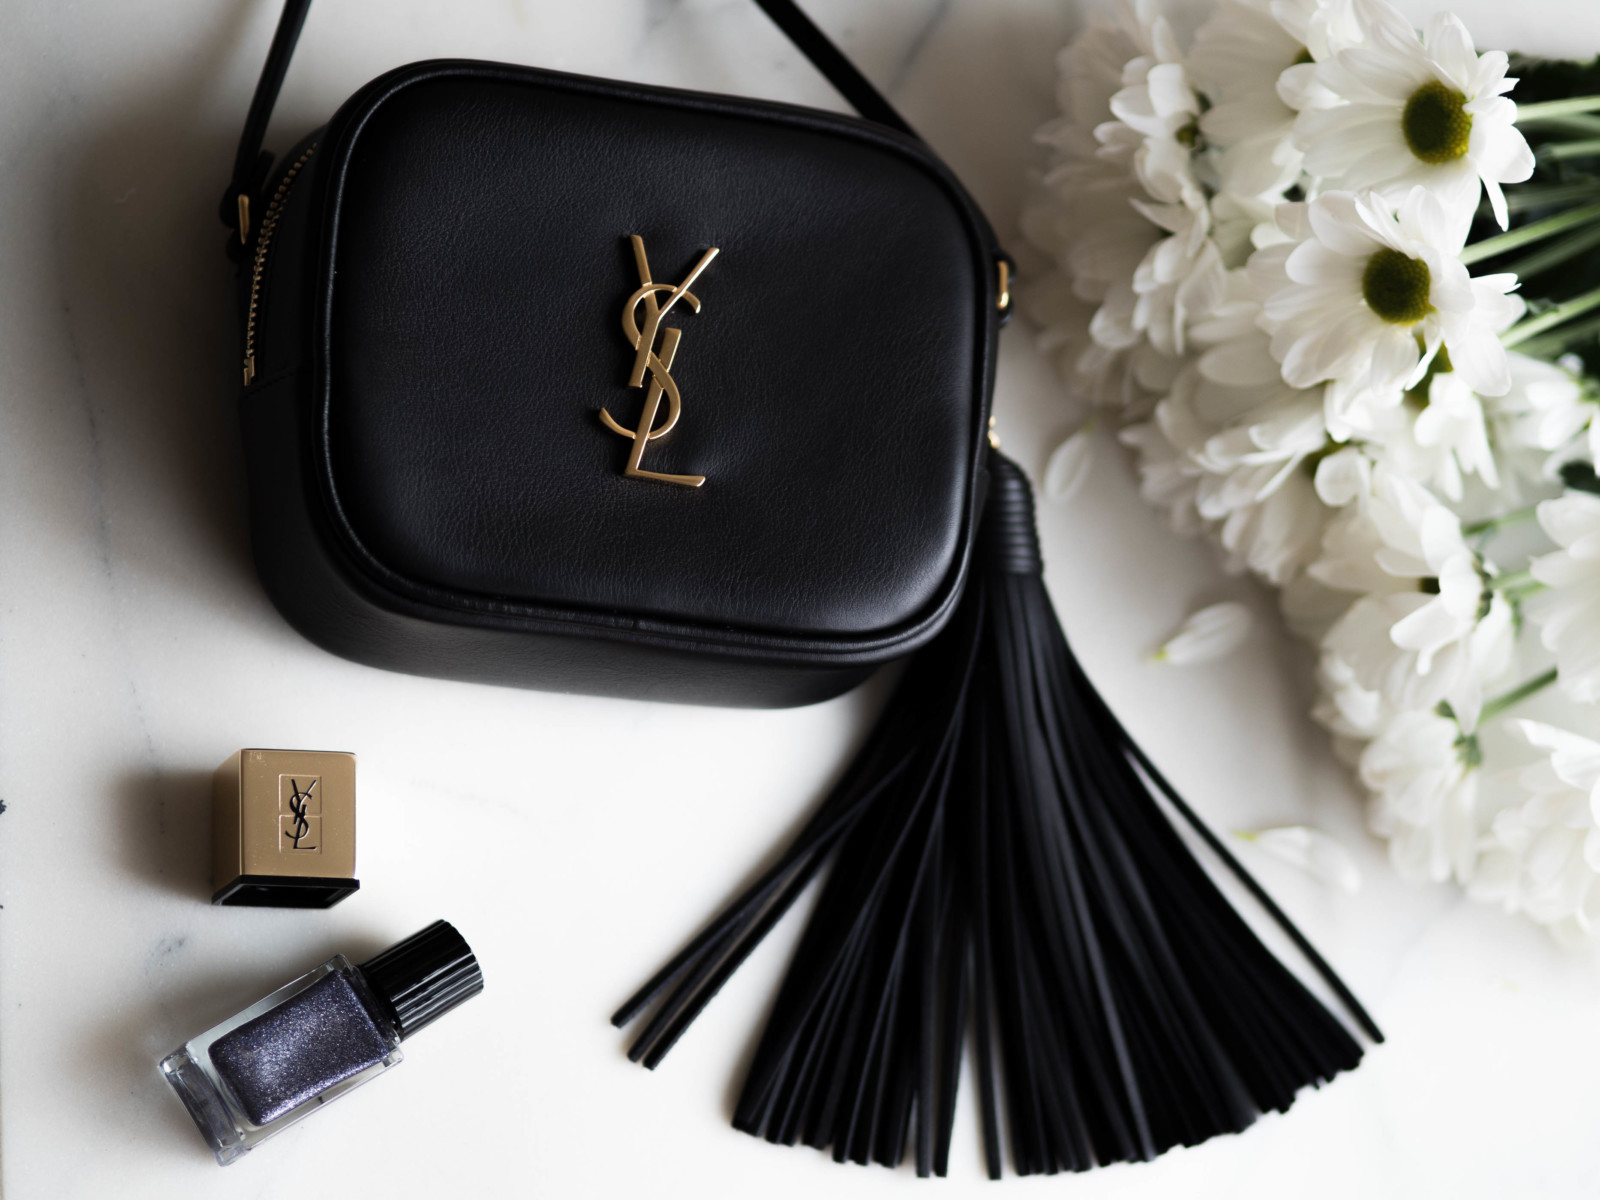 BAG REVIEW: My Newest YSL Bag - BLONDIE IN THE CITY